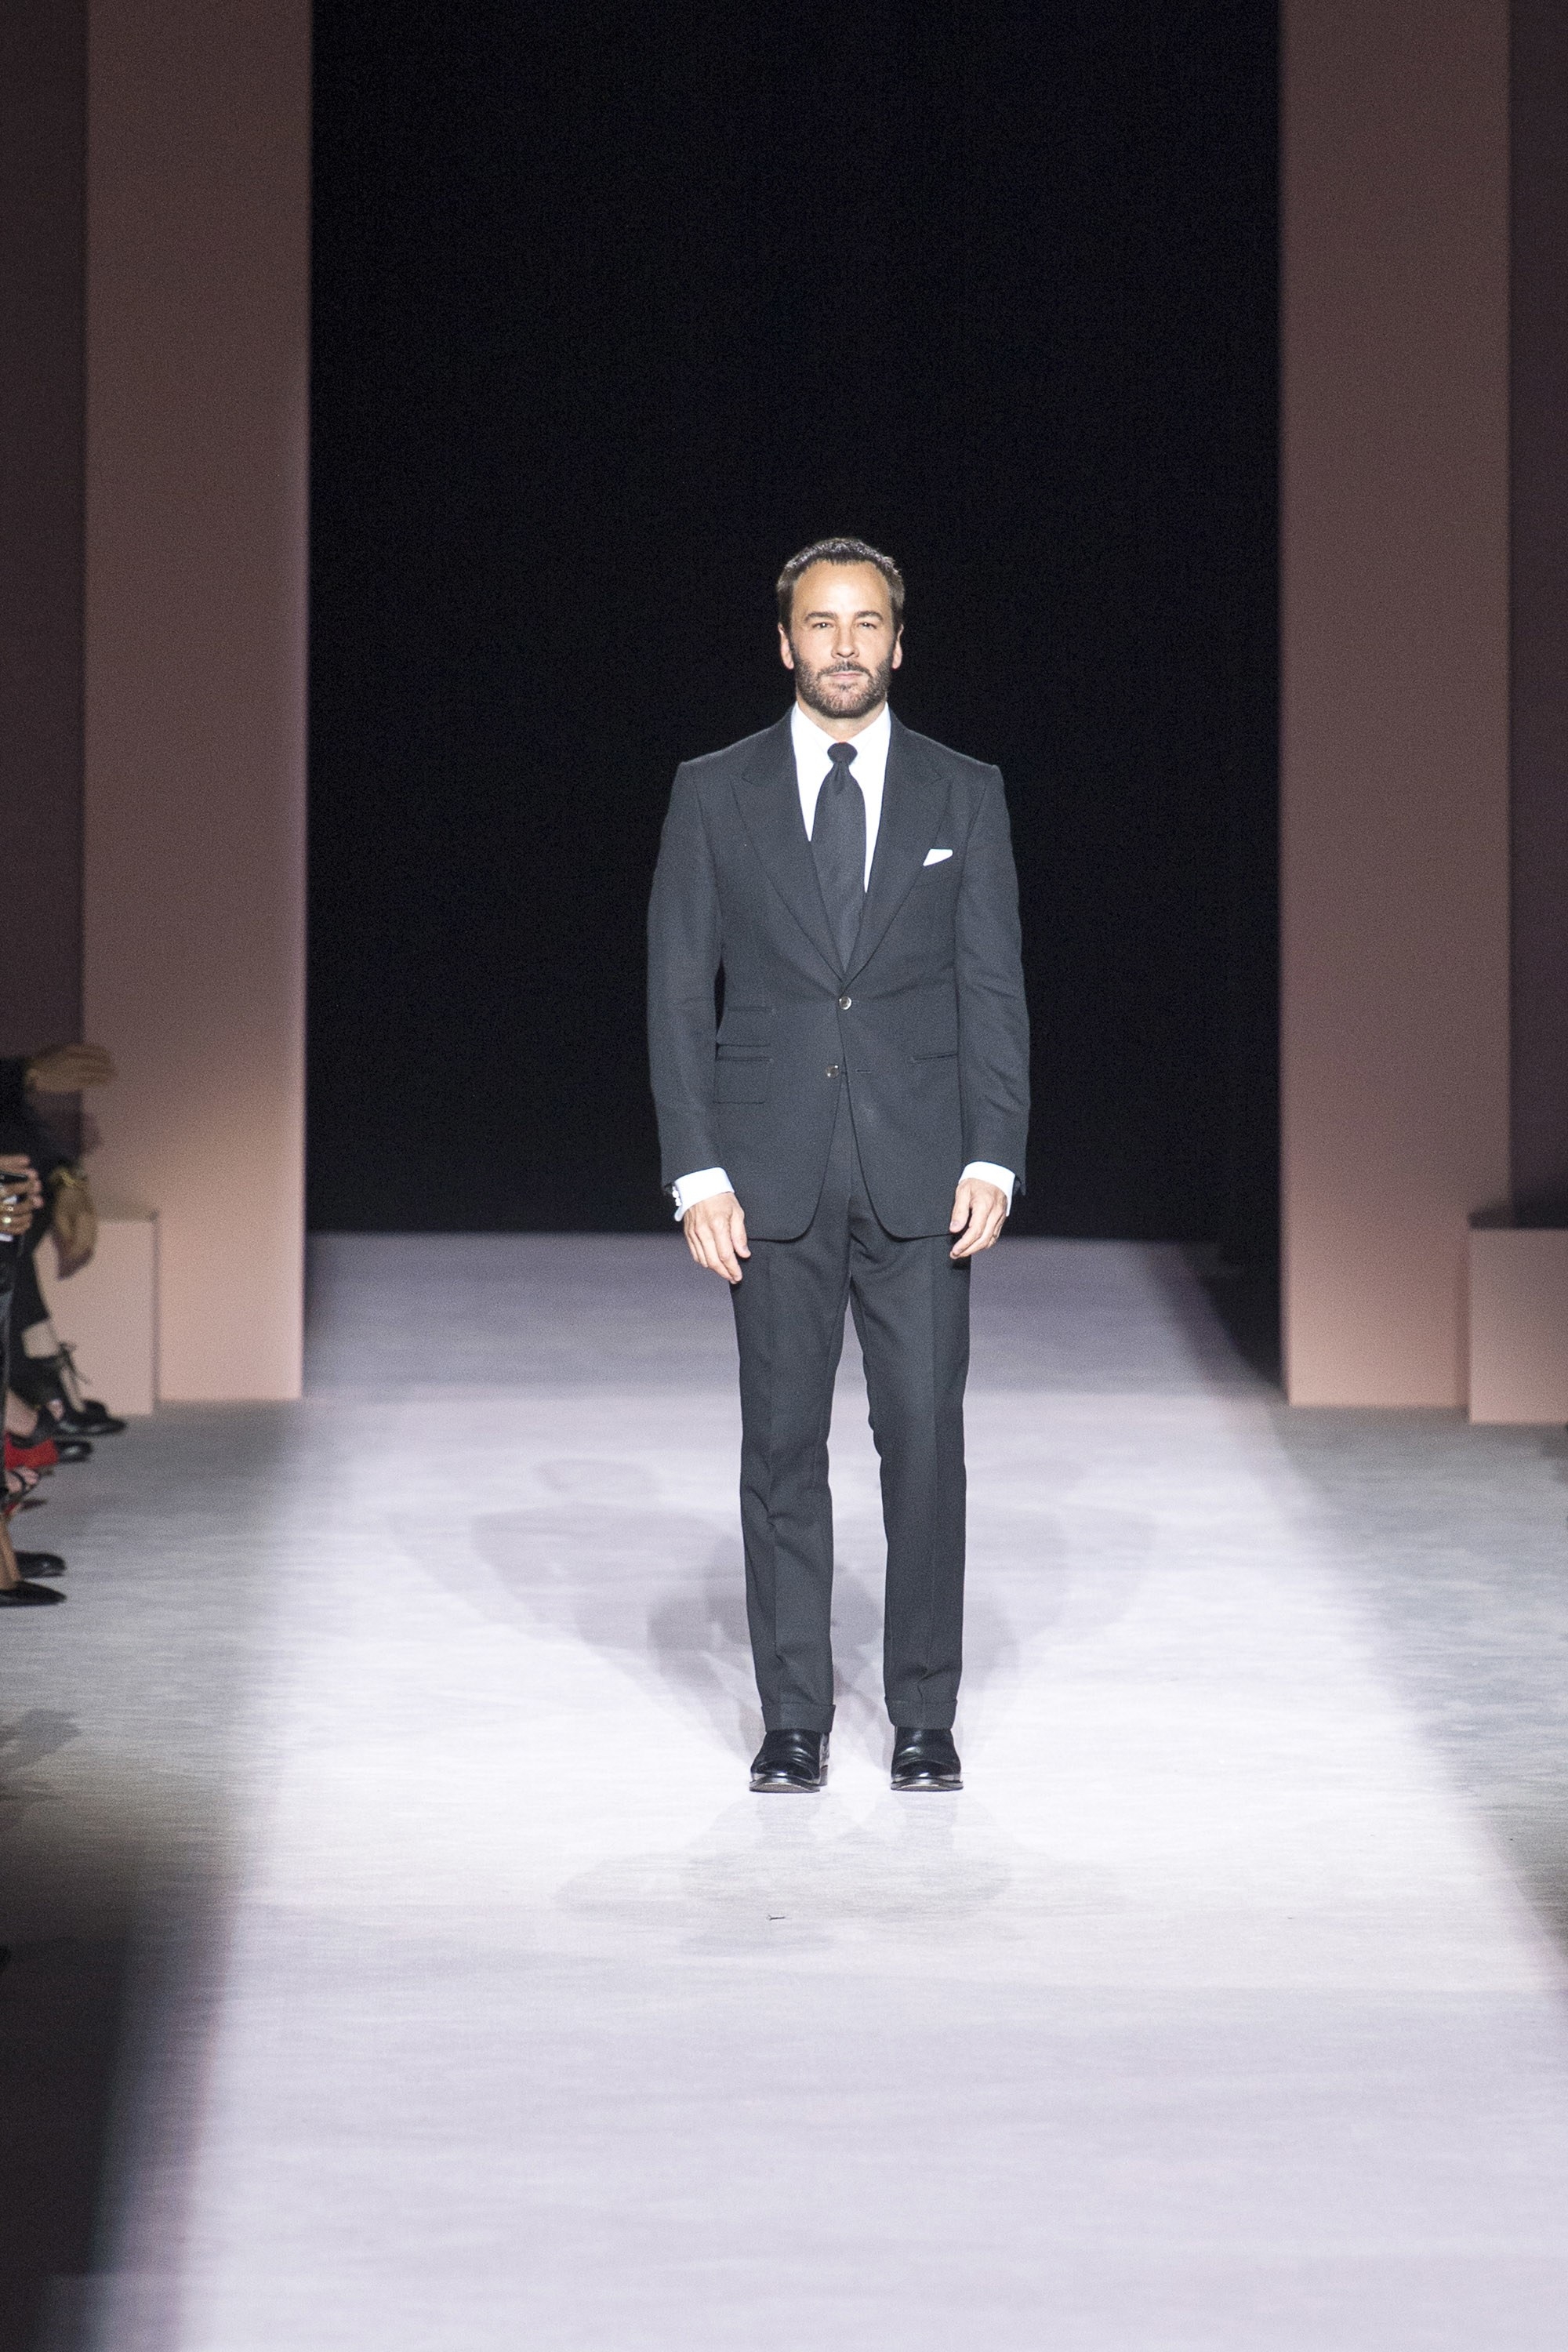 Tom Ford Takes Us To The ’90s With His SS/18 Collection At The #NYFWSS18